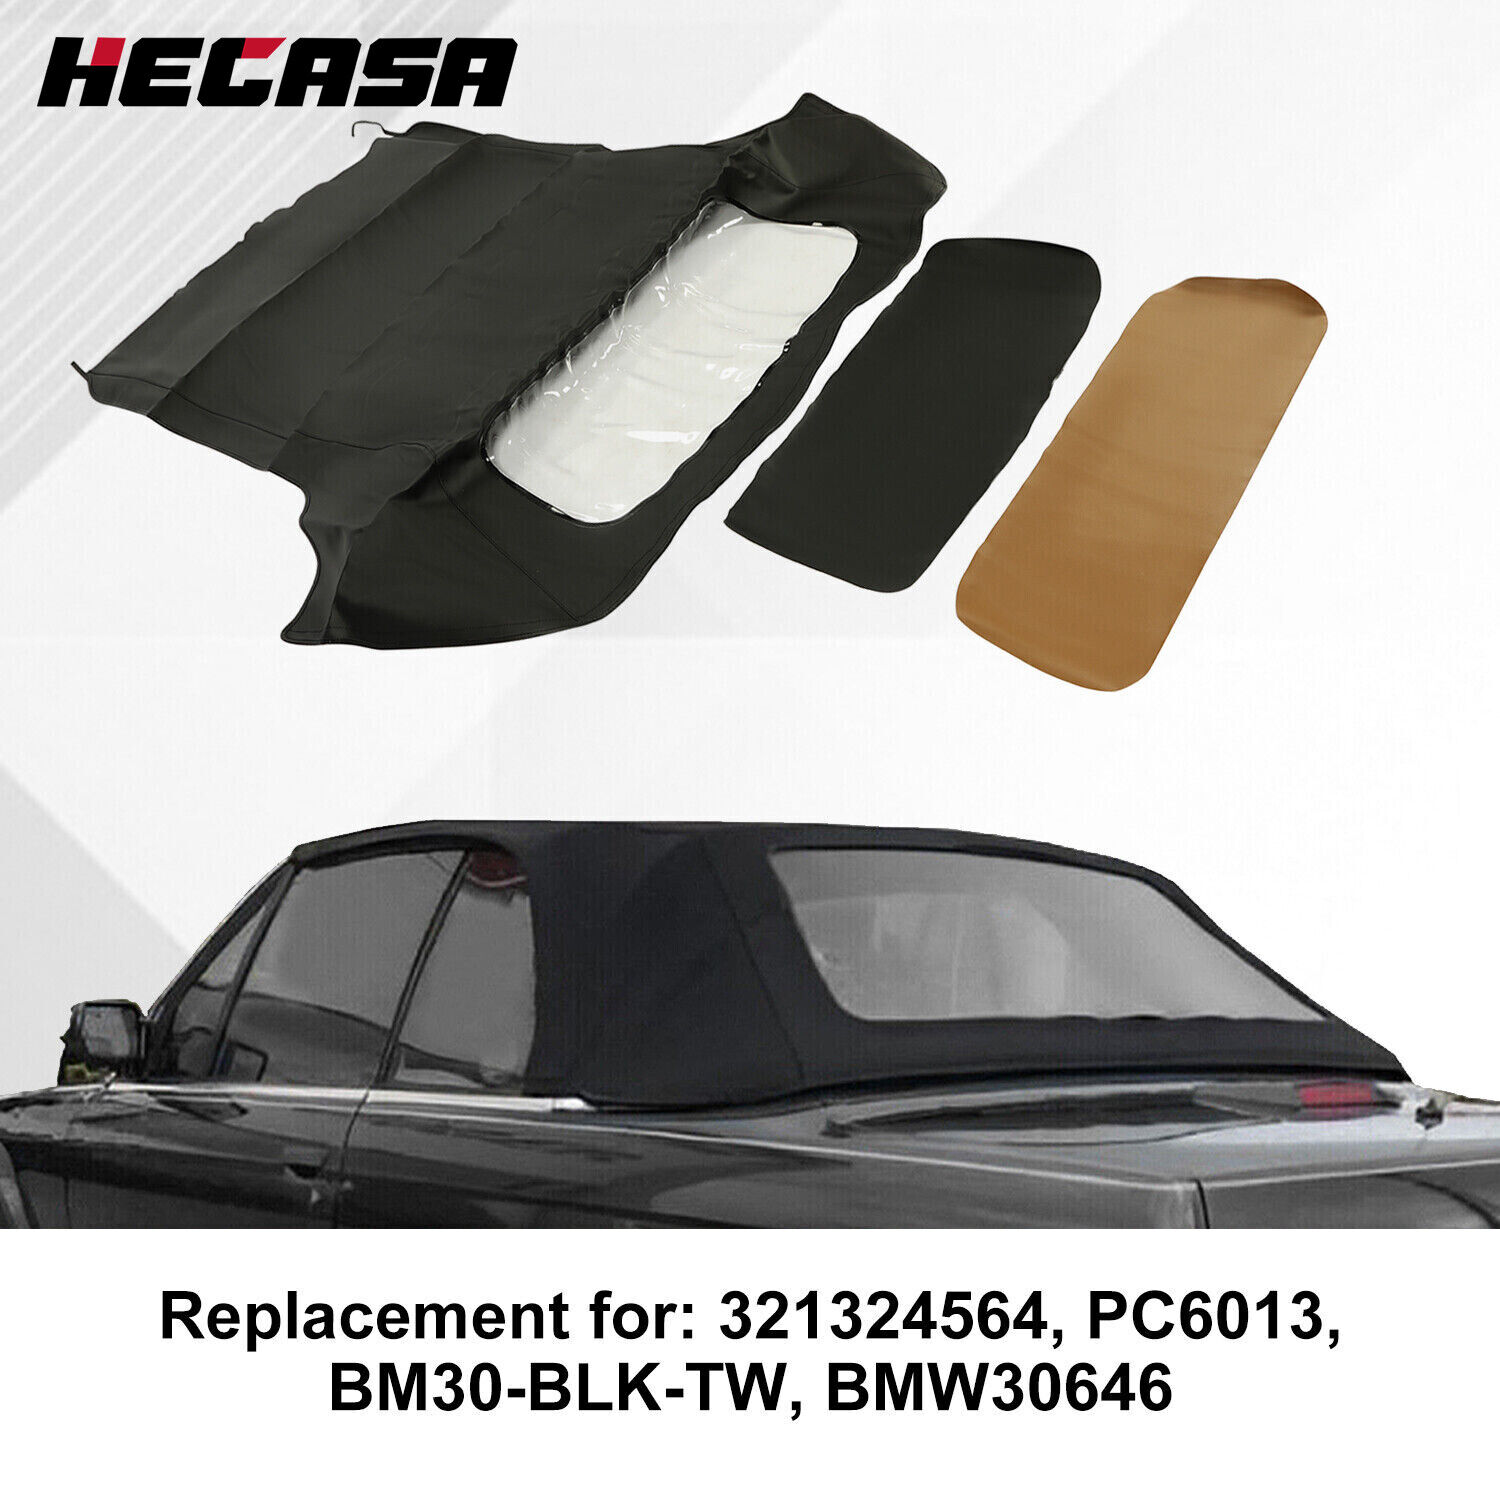 For BMW E30 E36 325i 318i 86-93 Convertible Soft Top Replacement&Clear window